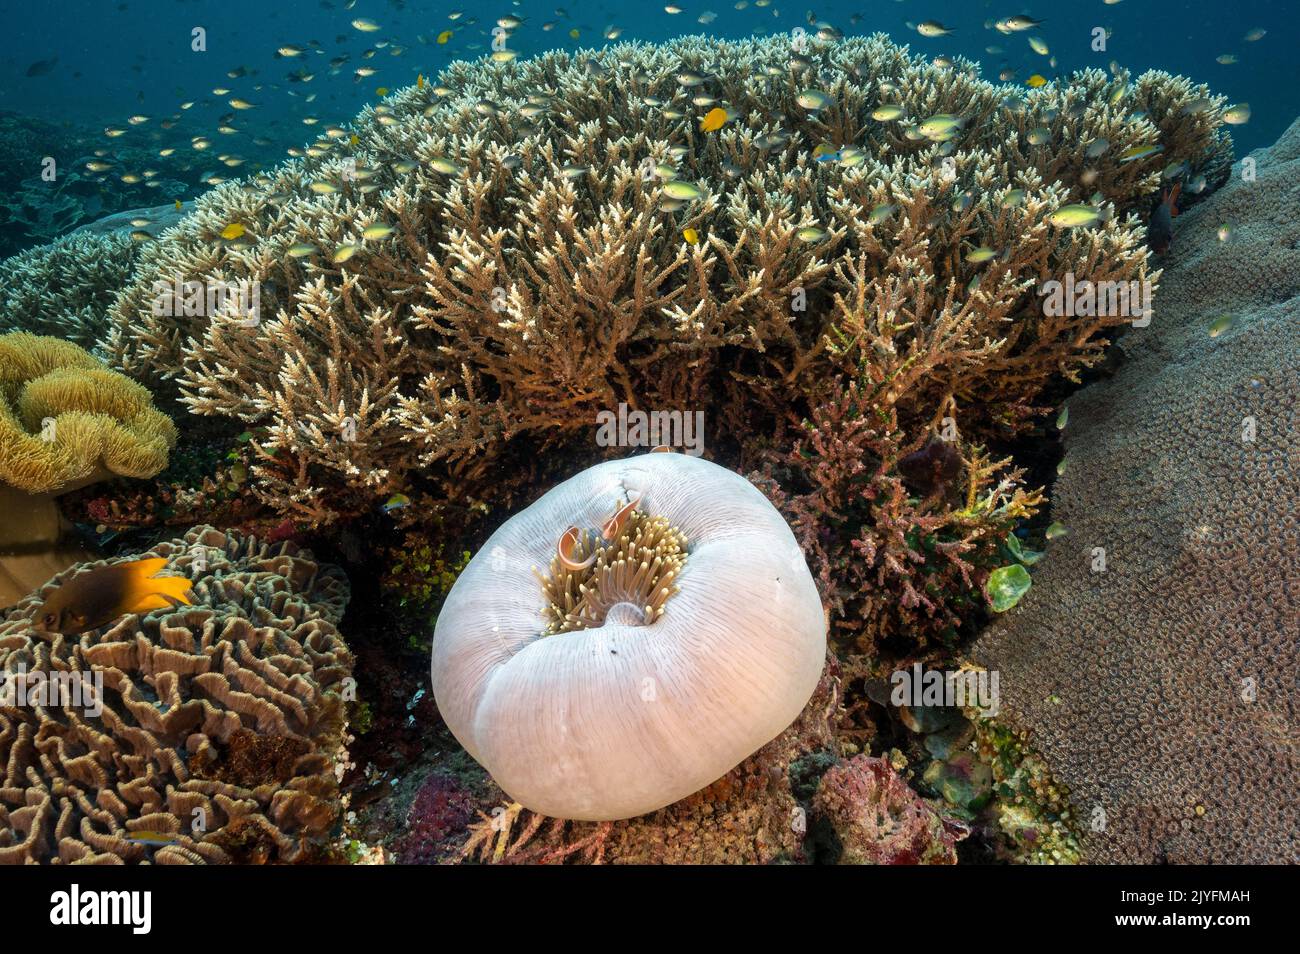 Pink anemone fishes, Amphiprion perideraion, and Staghorn corals, Acrapora spinosa, Raja Ampat Indonesia. Stock Photo